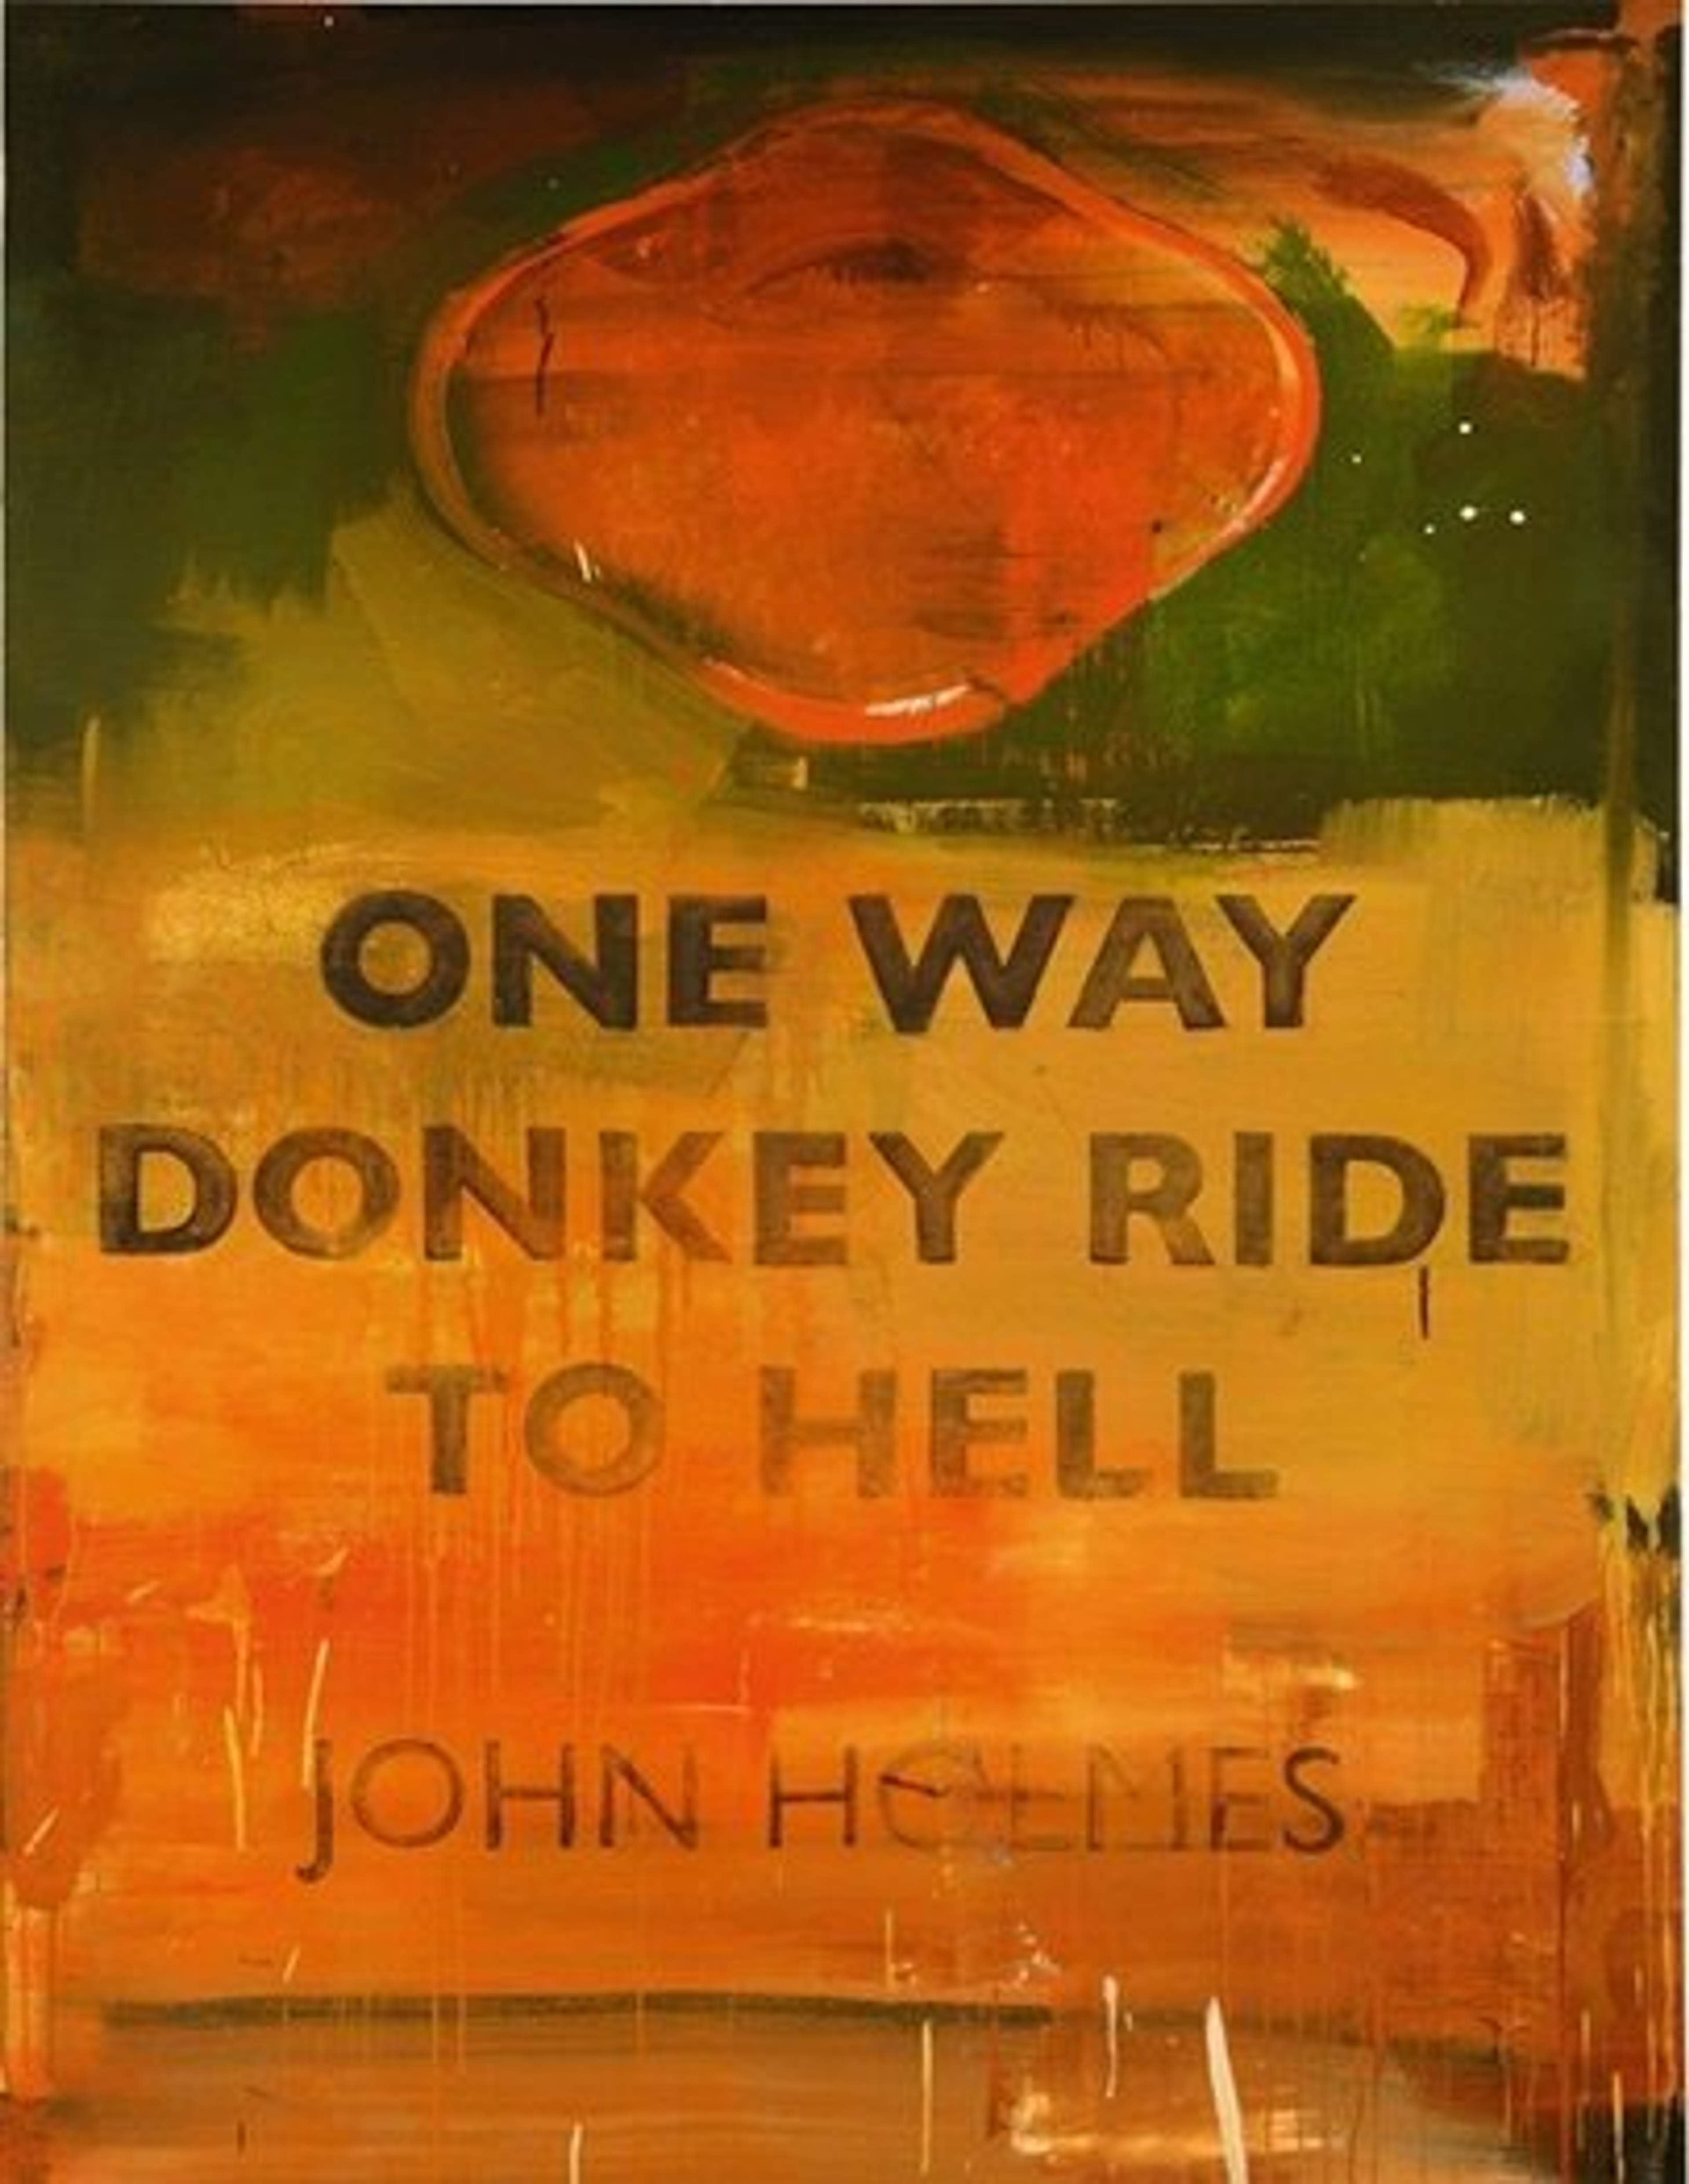 John Holmes, One Way Donkey Ride To Hell by Harland Miller